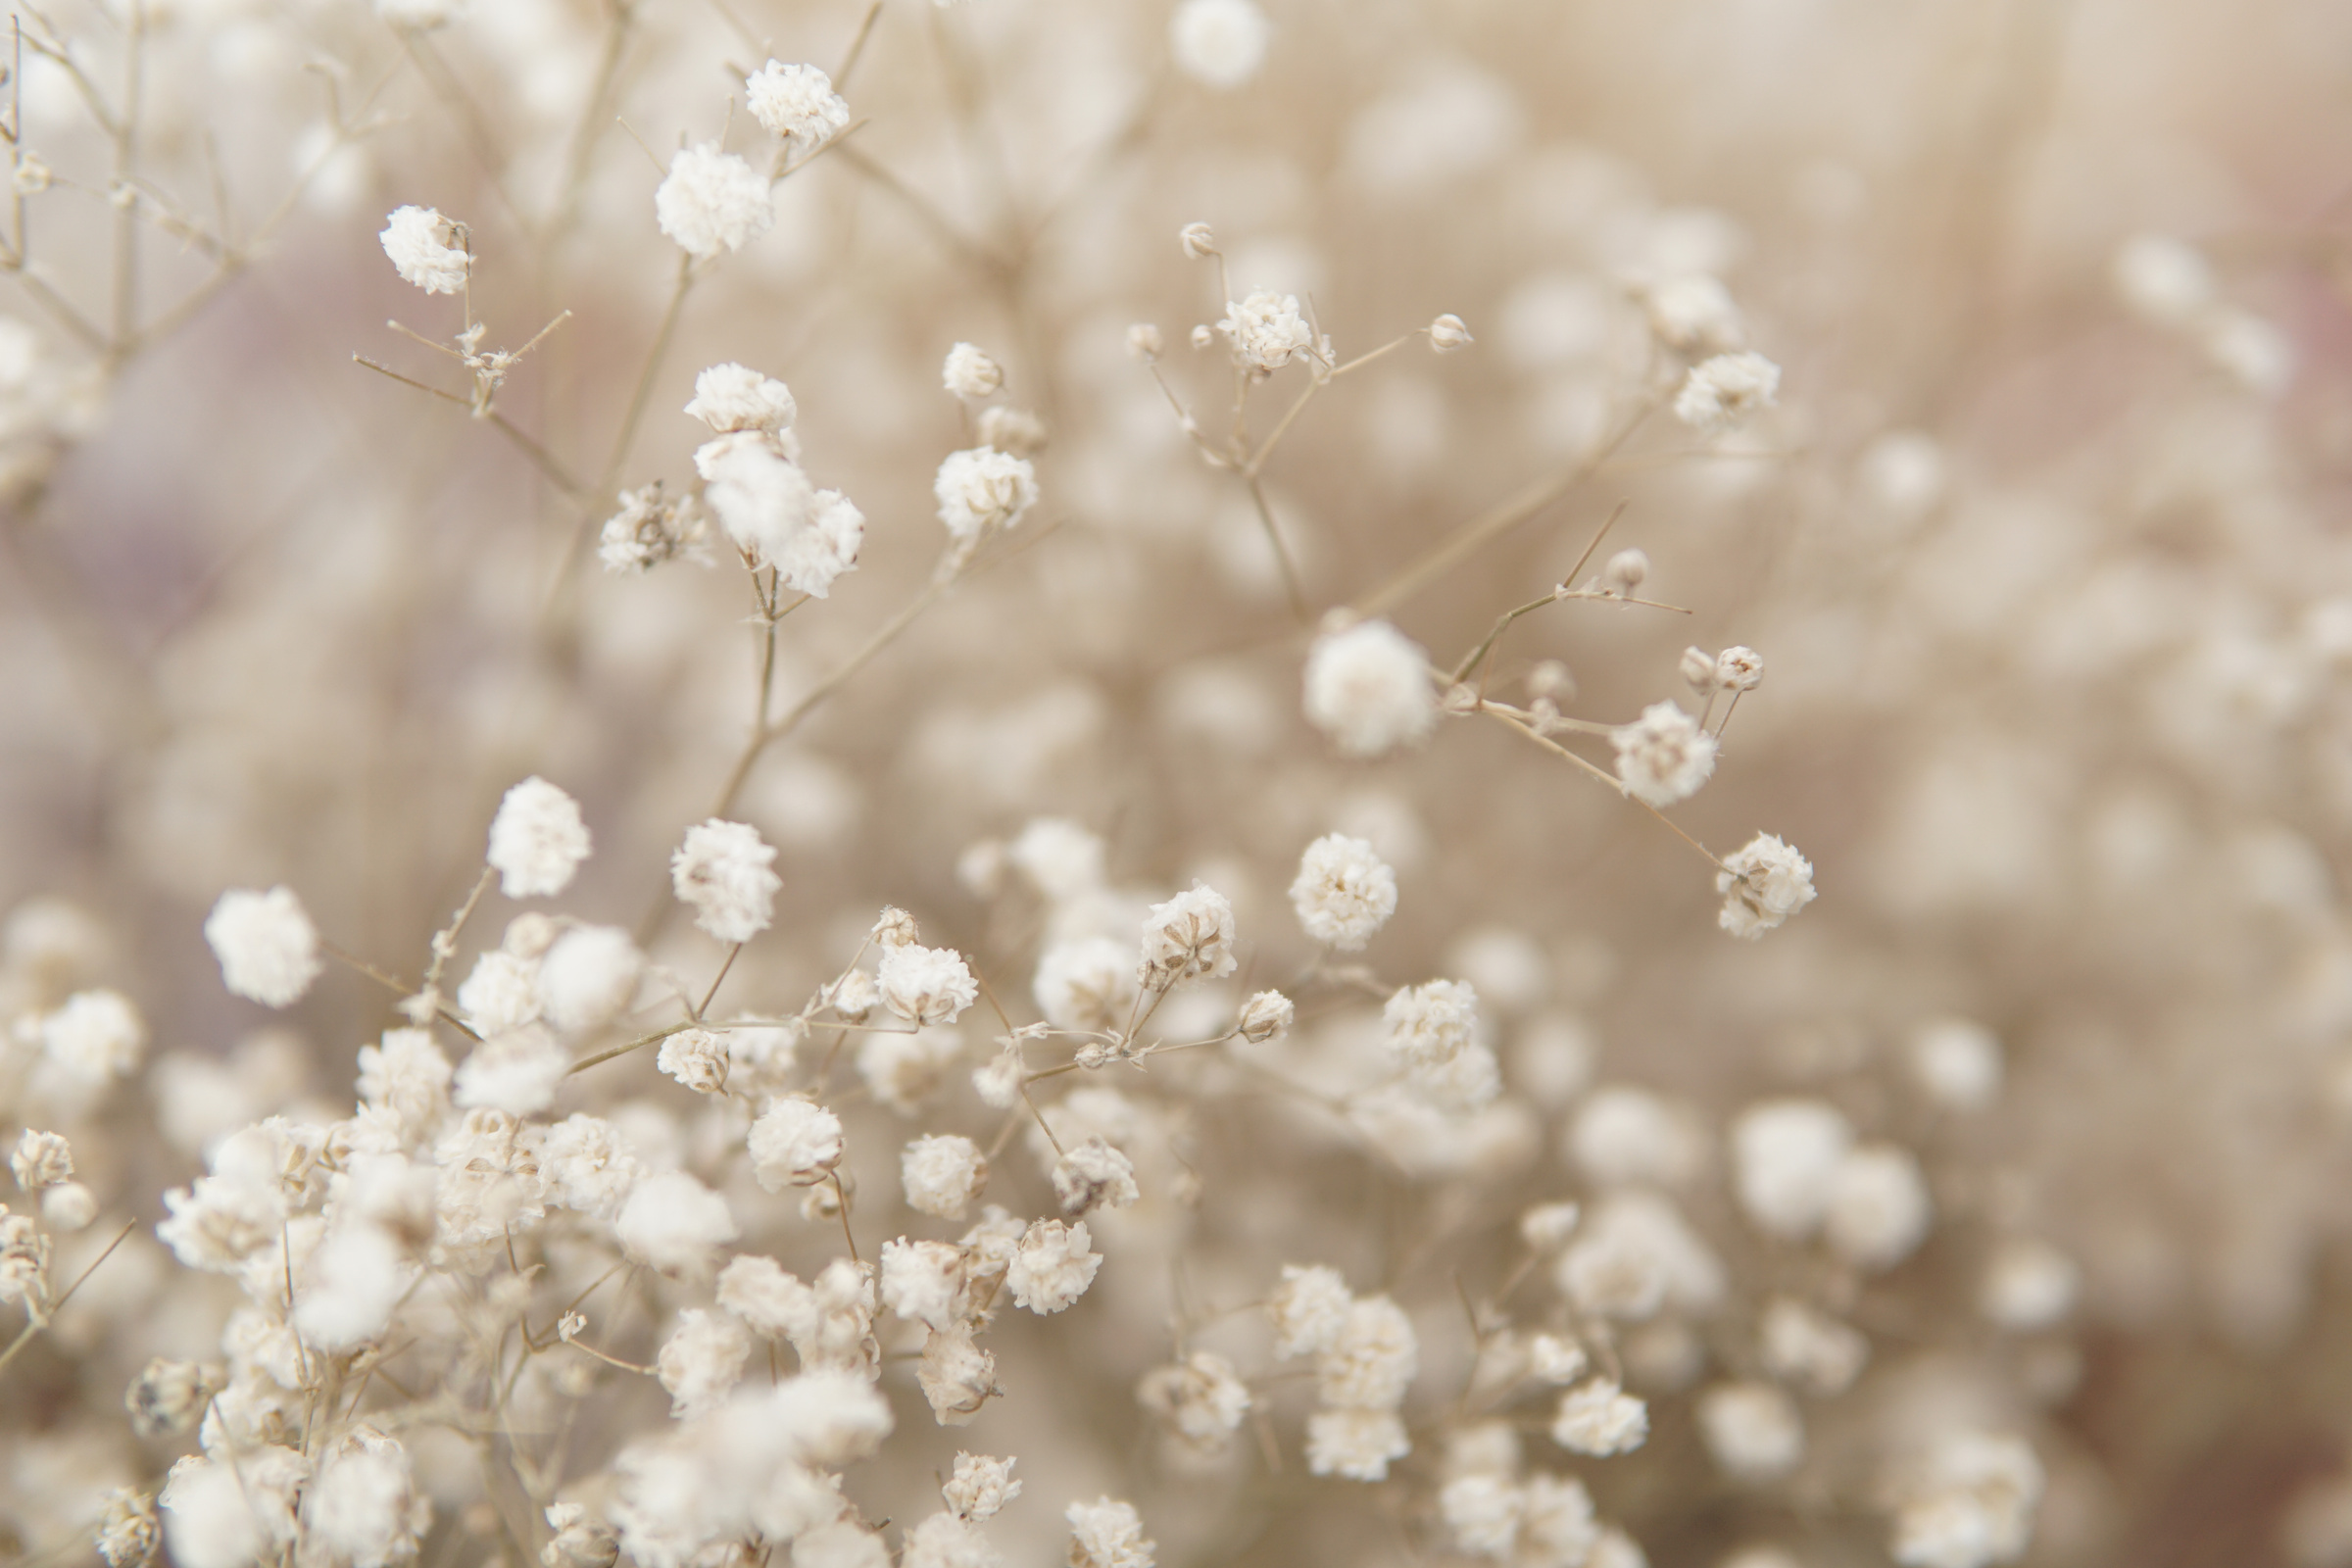 Dried baby’s breath flowers